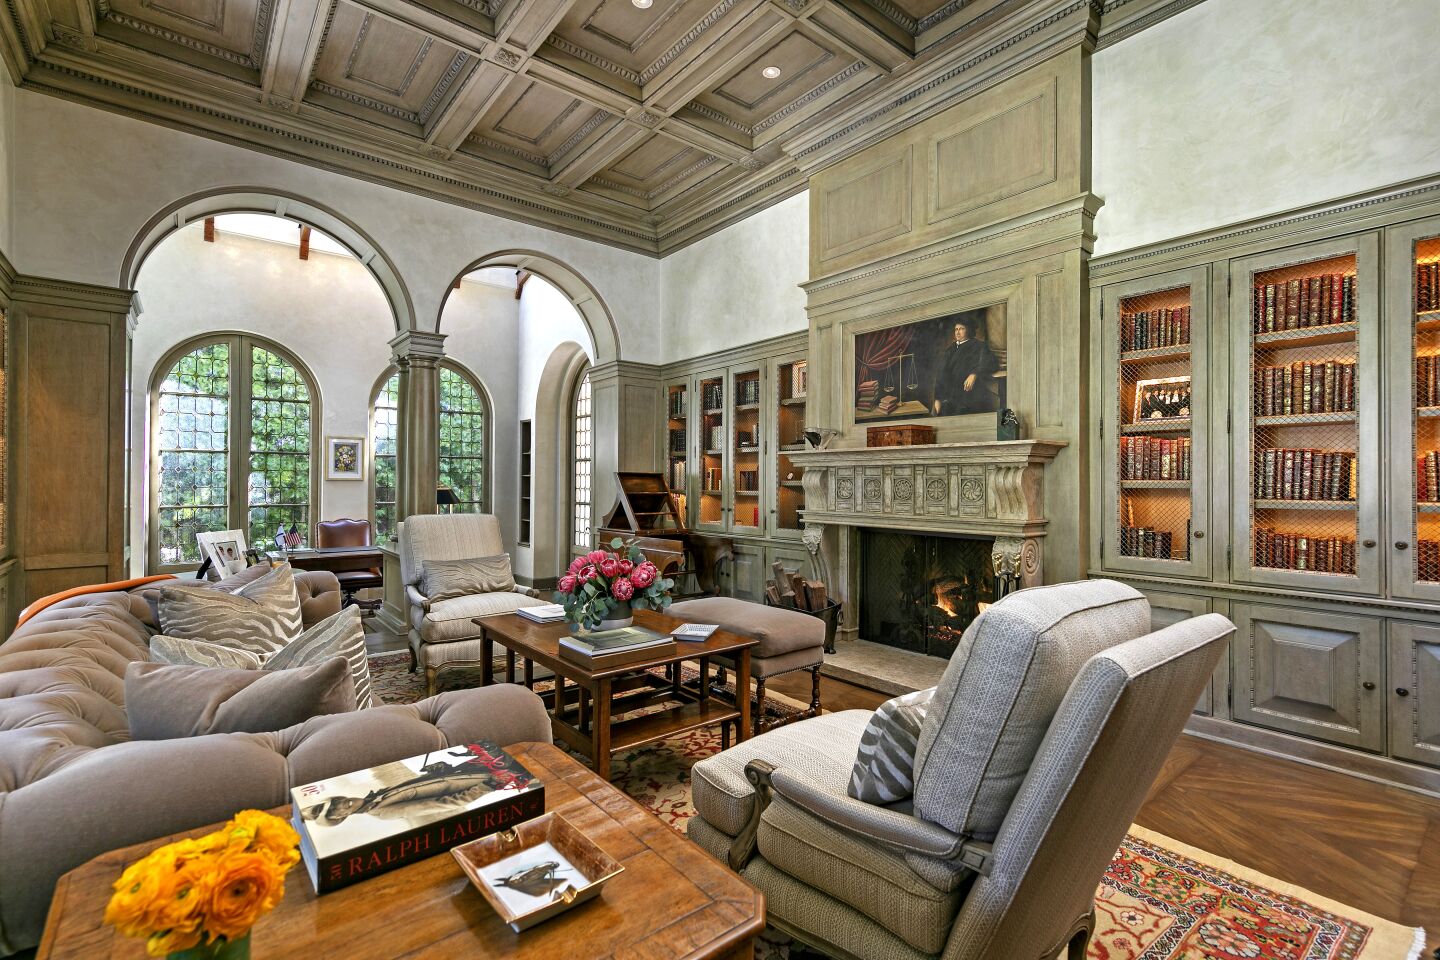 Designed by architect Robert Sinclair, the home boasts Venetian plaster walls and colonnades.